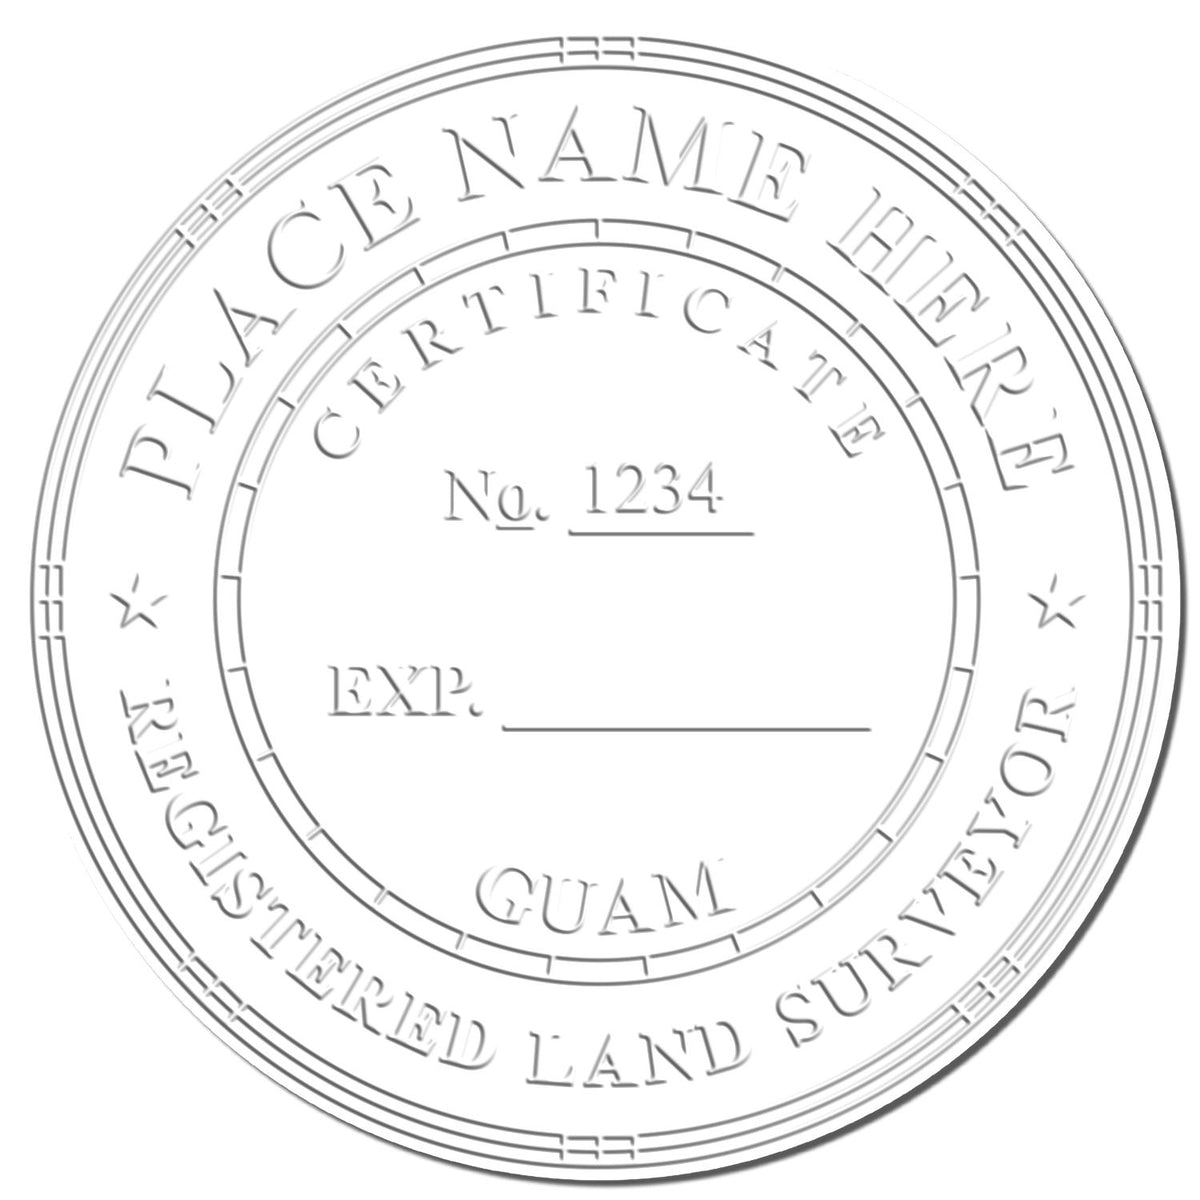 This paper is stamped with a sample imprint of the State of Guam Soft Land Surveyor Embossing Seal, signifying its quality and reliability.